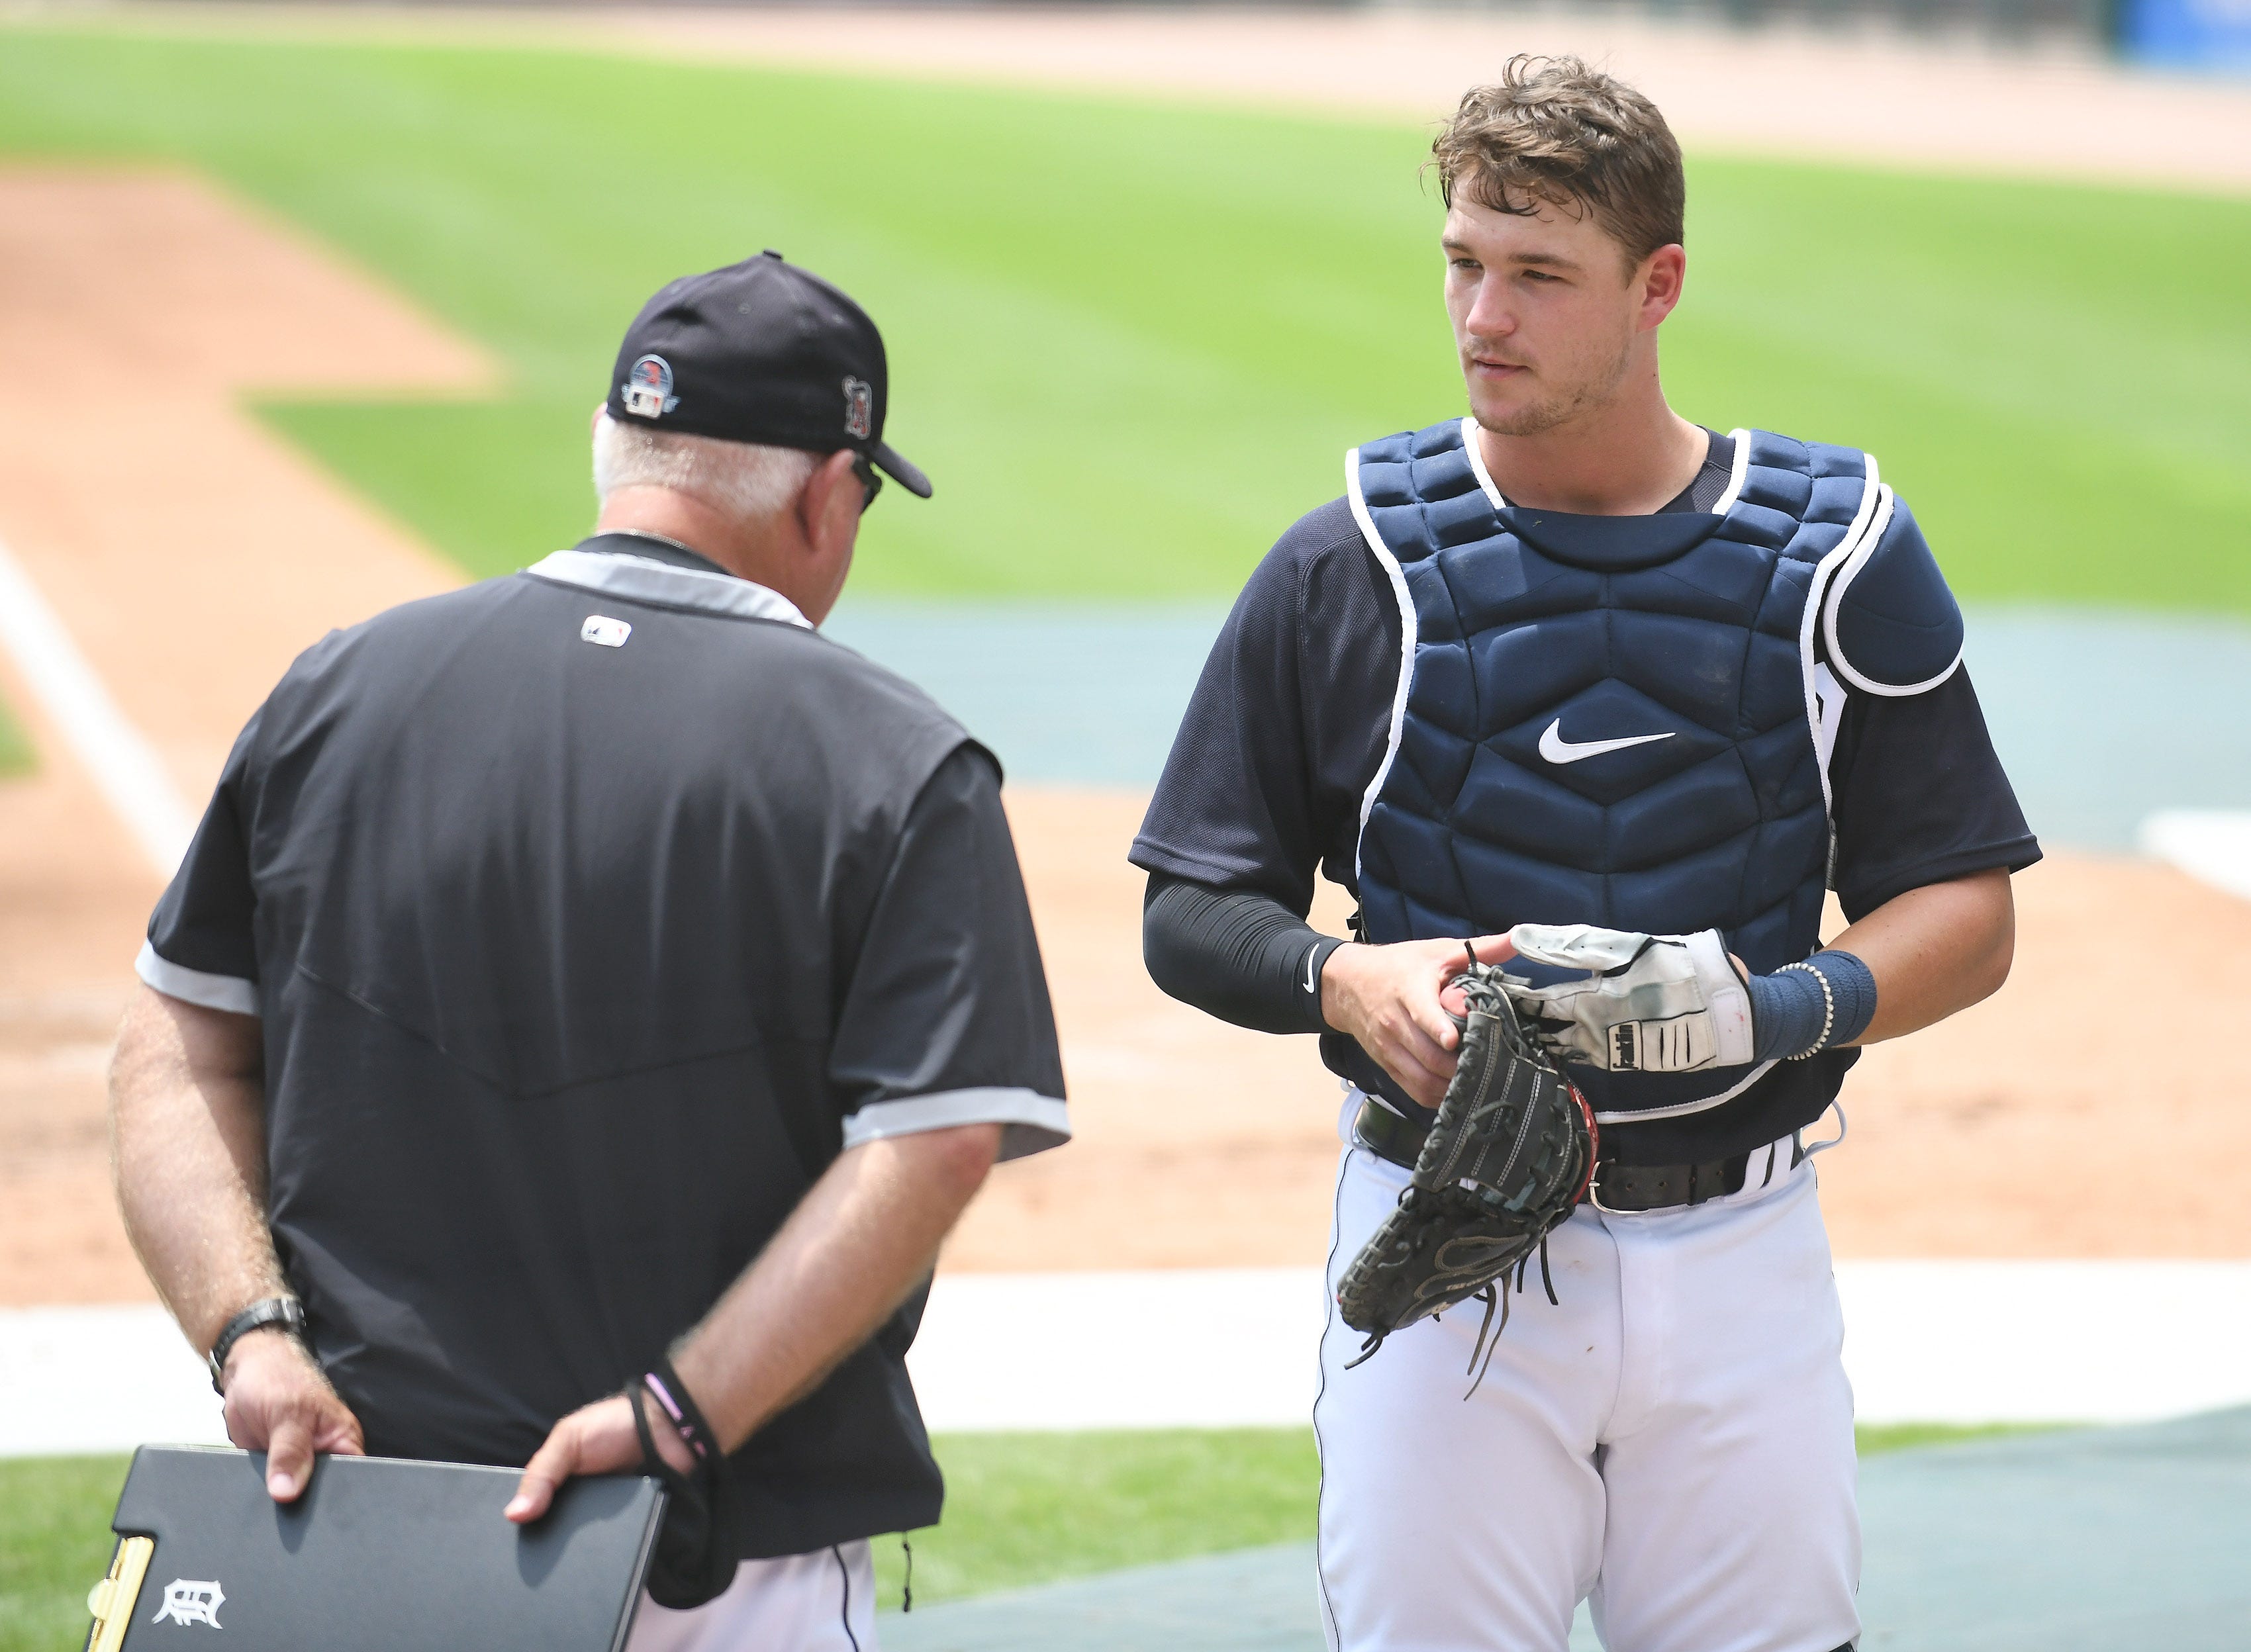 Tigers manager Ron Gardenhire, left, talks with non-roster catcher Dillon Dingler.